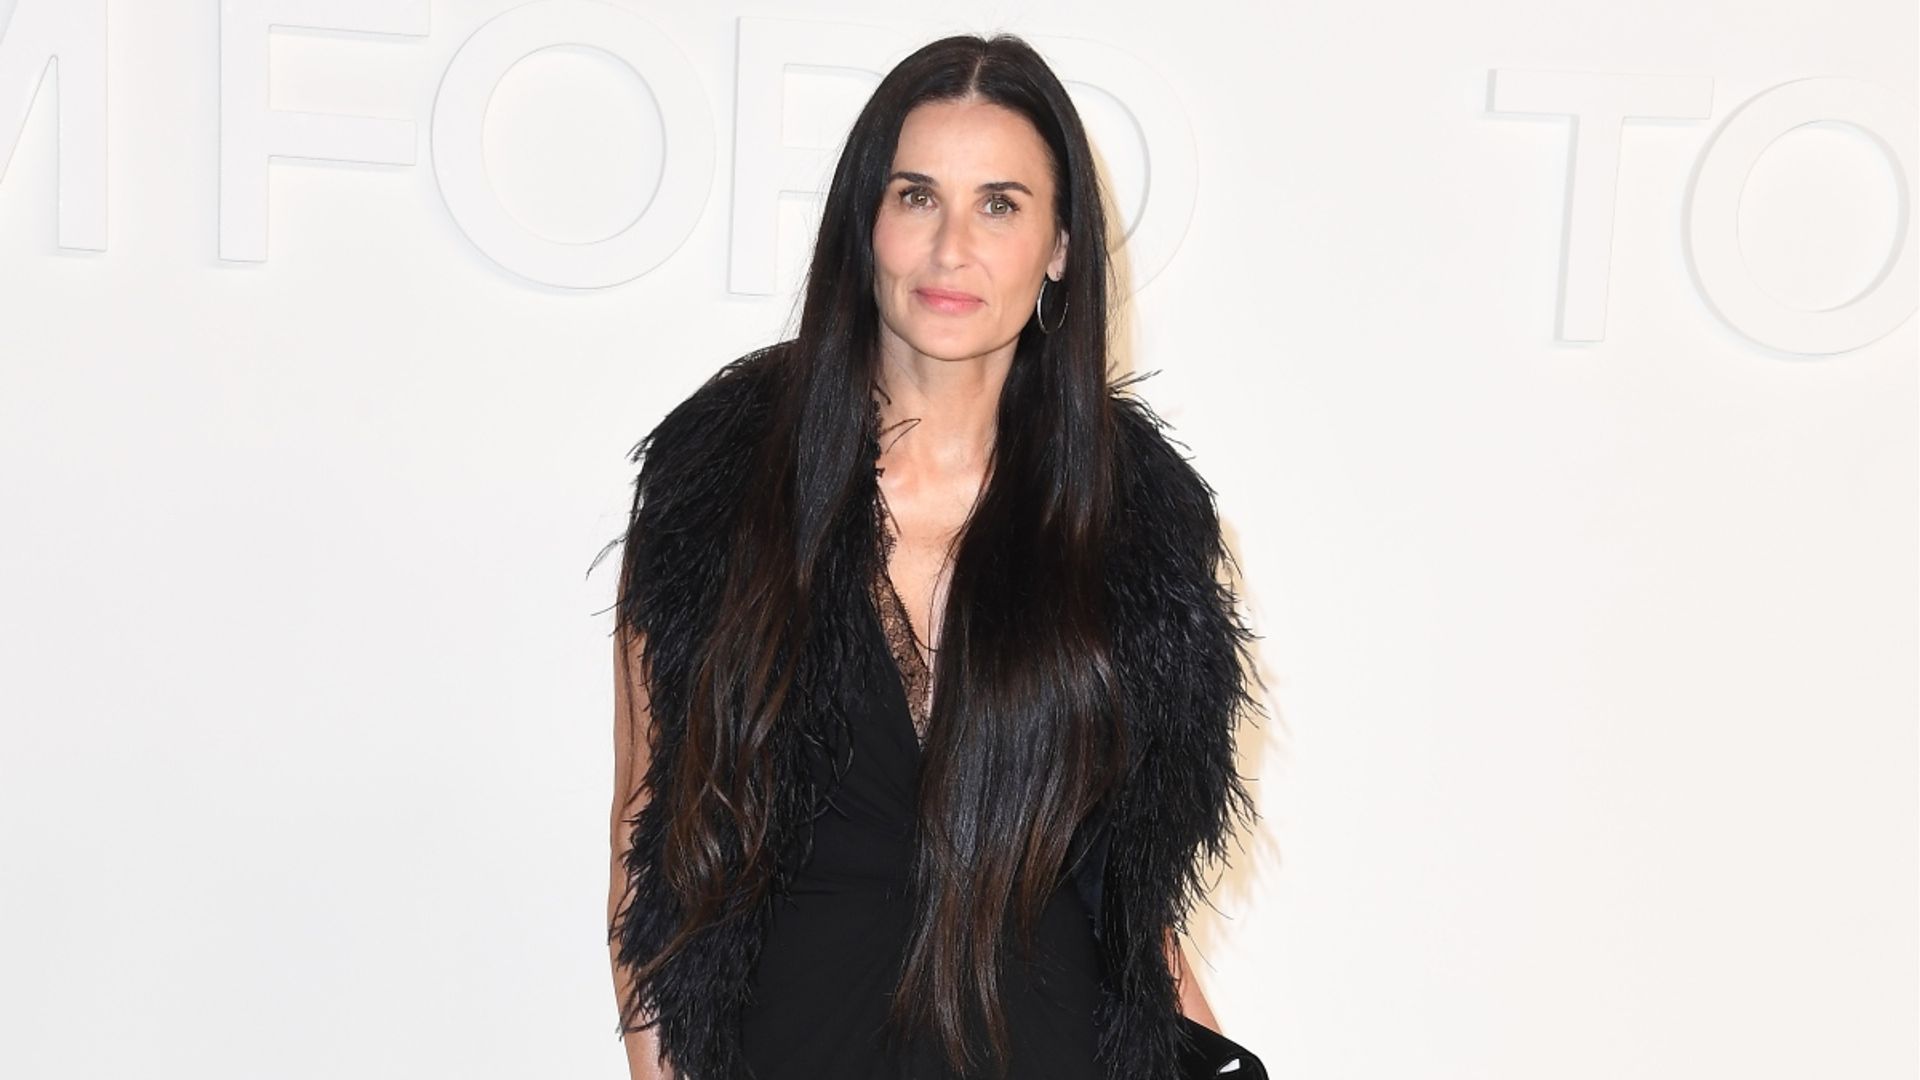 Demi Moore sends pulses racing with sultry photo that sparks reaction ...